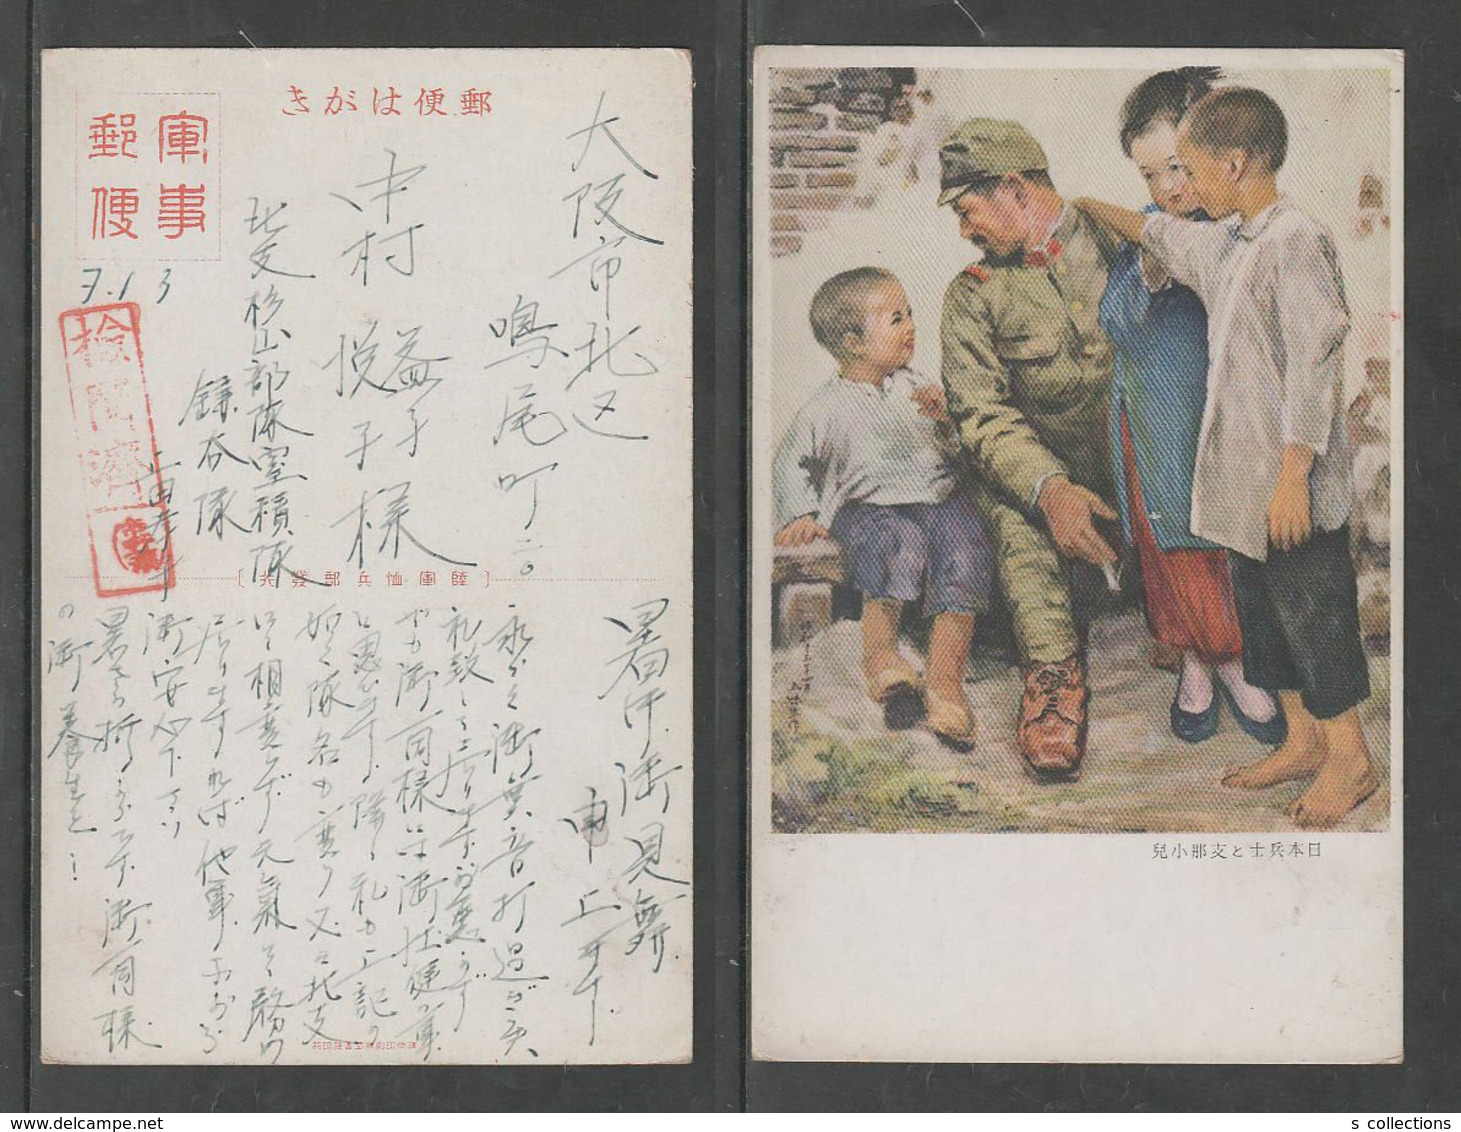 JAPAN WWII Military Japanese Soldier Chinese Children Picture Postcard NORTH CHINA WW2 MANCHURIA CHINE JAPON GIAPPONE - 1941-45 Chine Du Nord